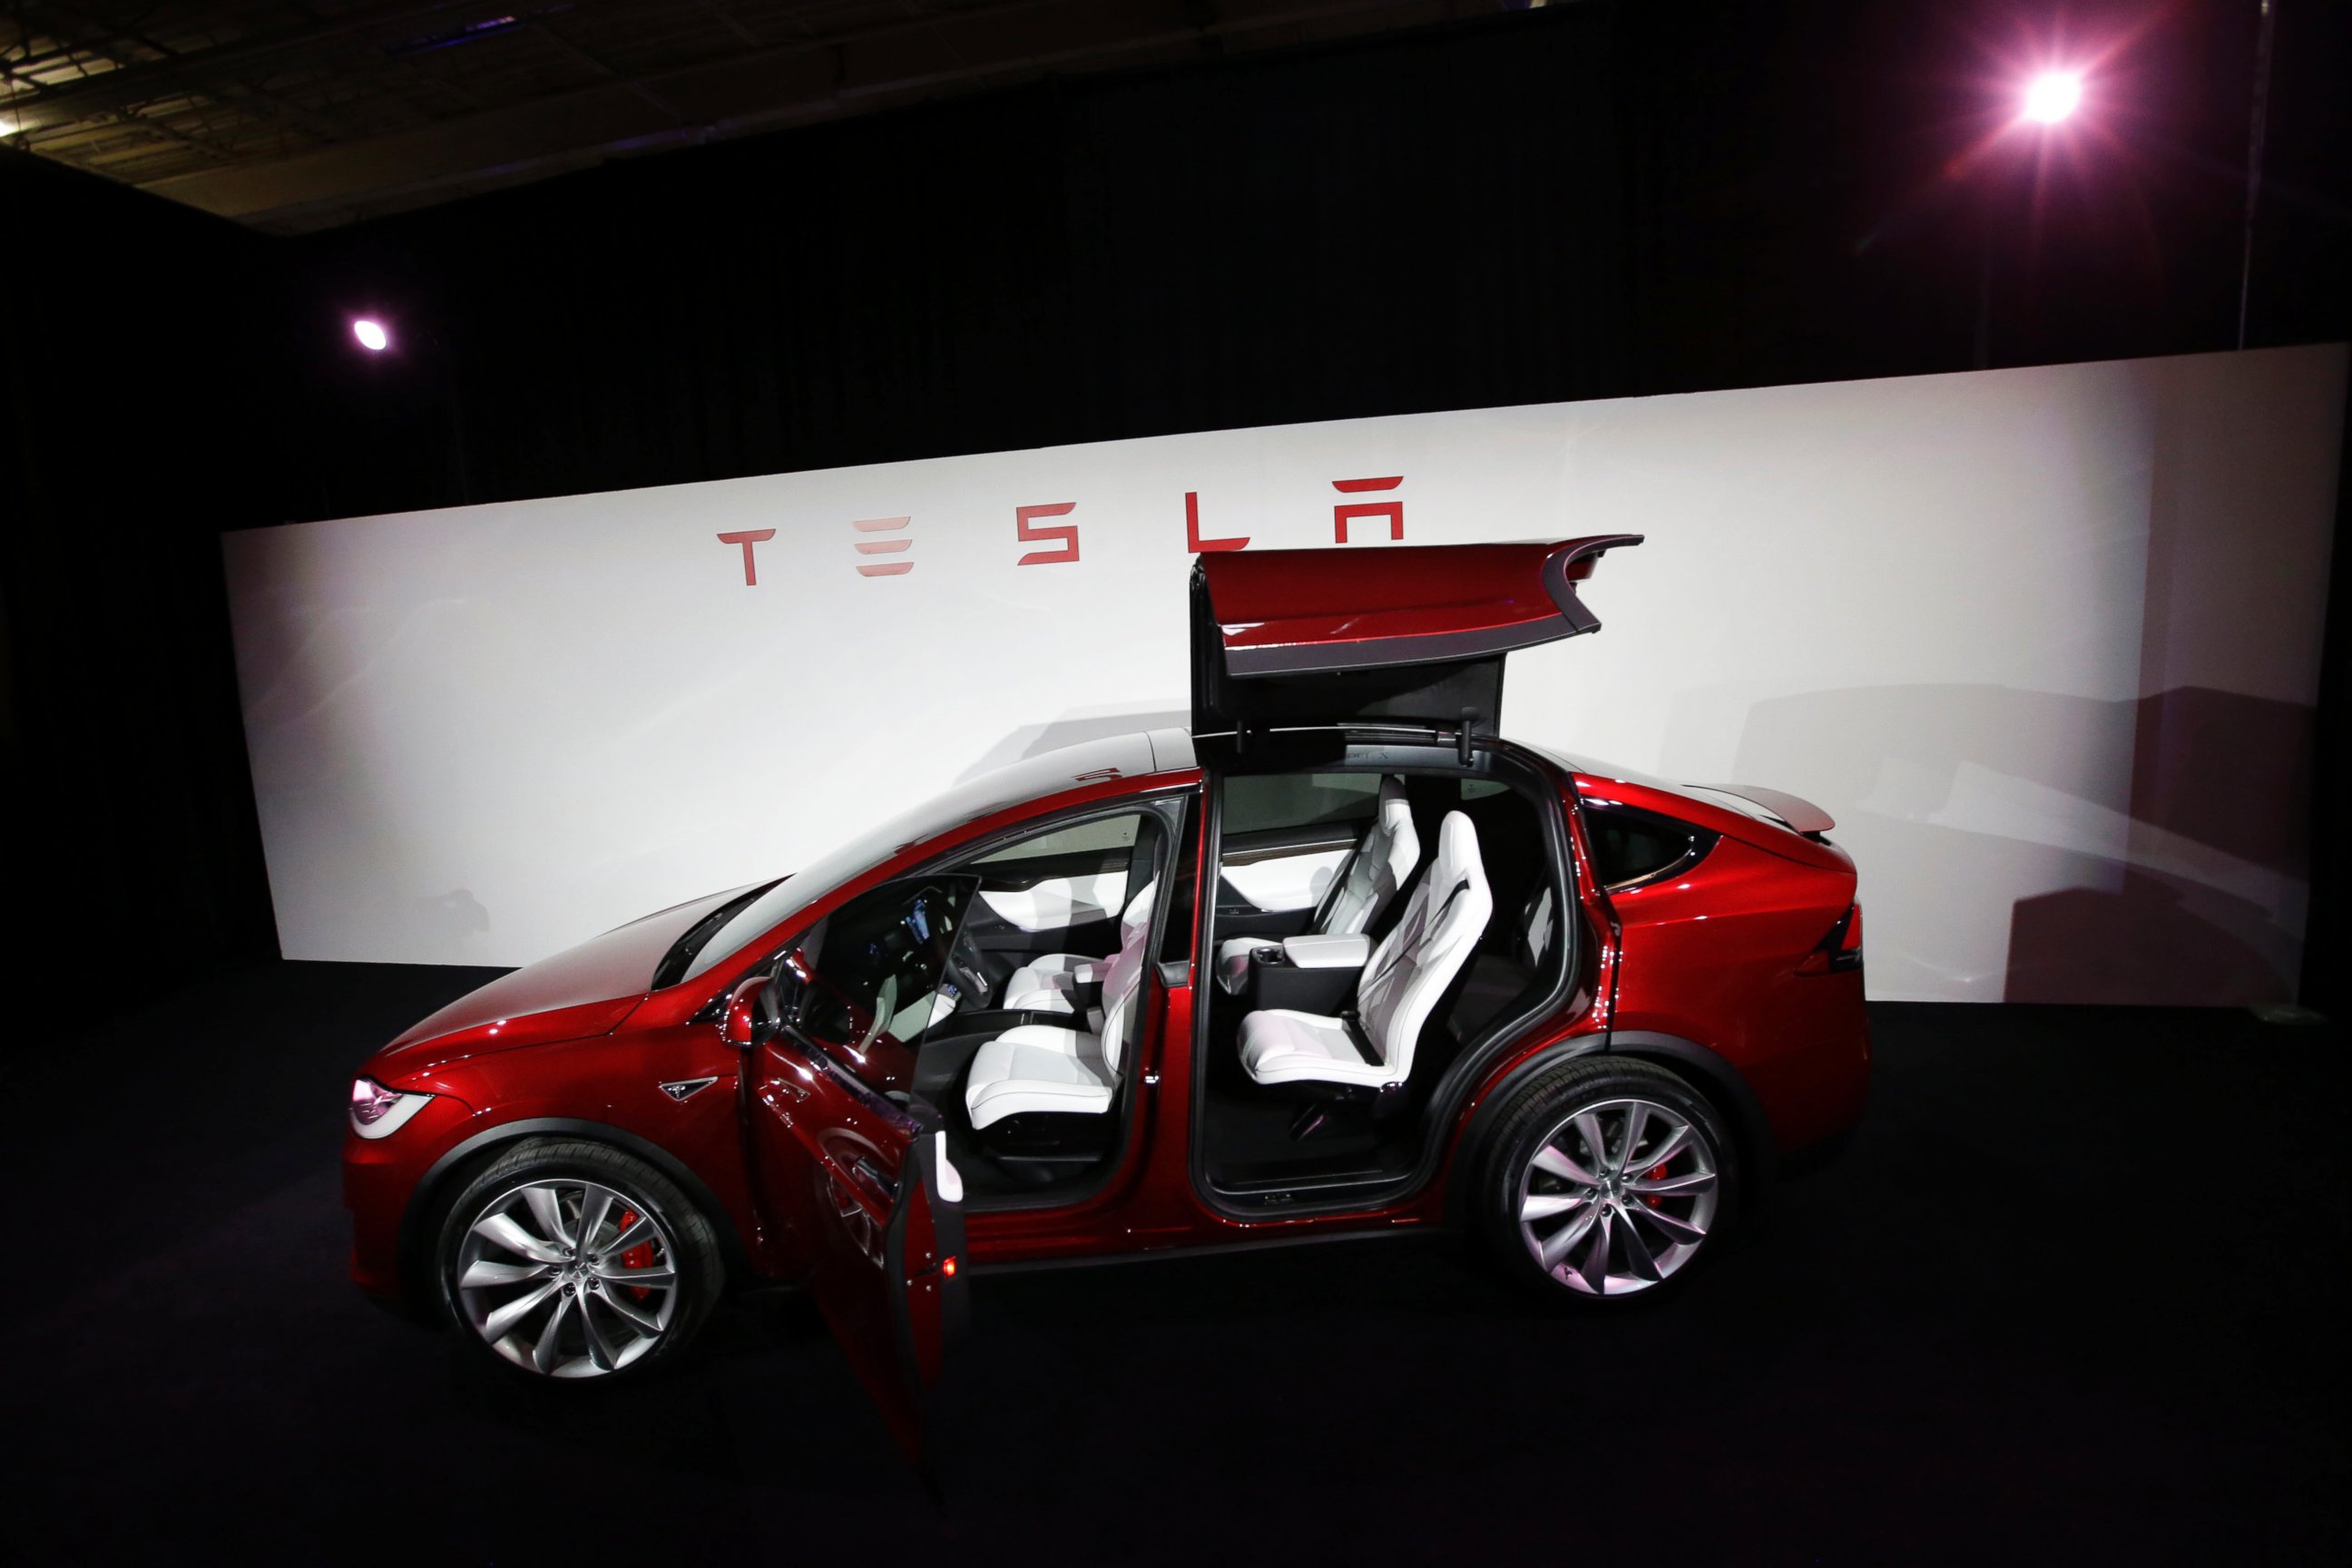 PHOTO: The Tesla Model X car is introduced at the company's headquarters, Sept. 29, 2015, in Fremont, Calif.